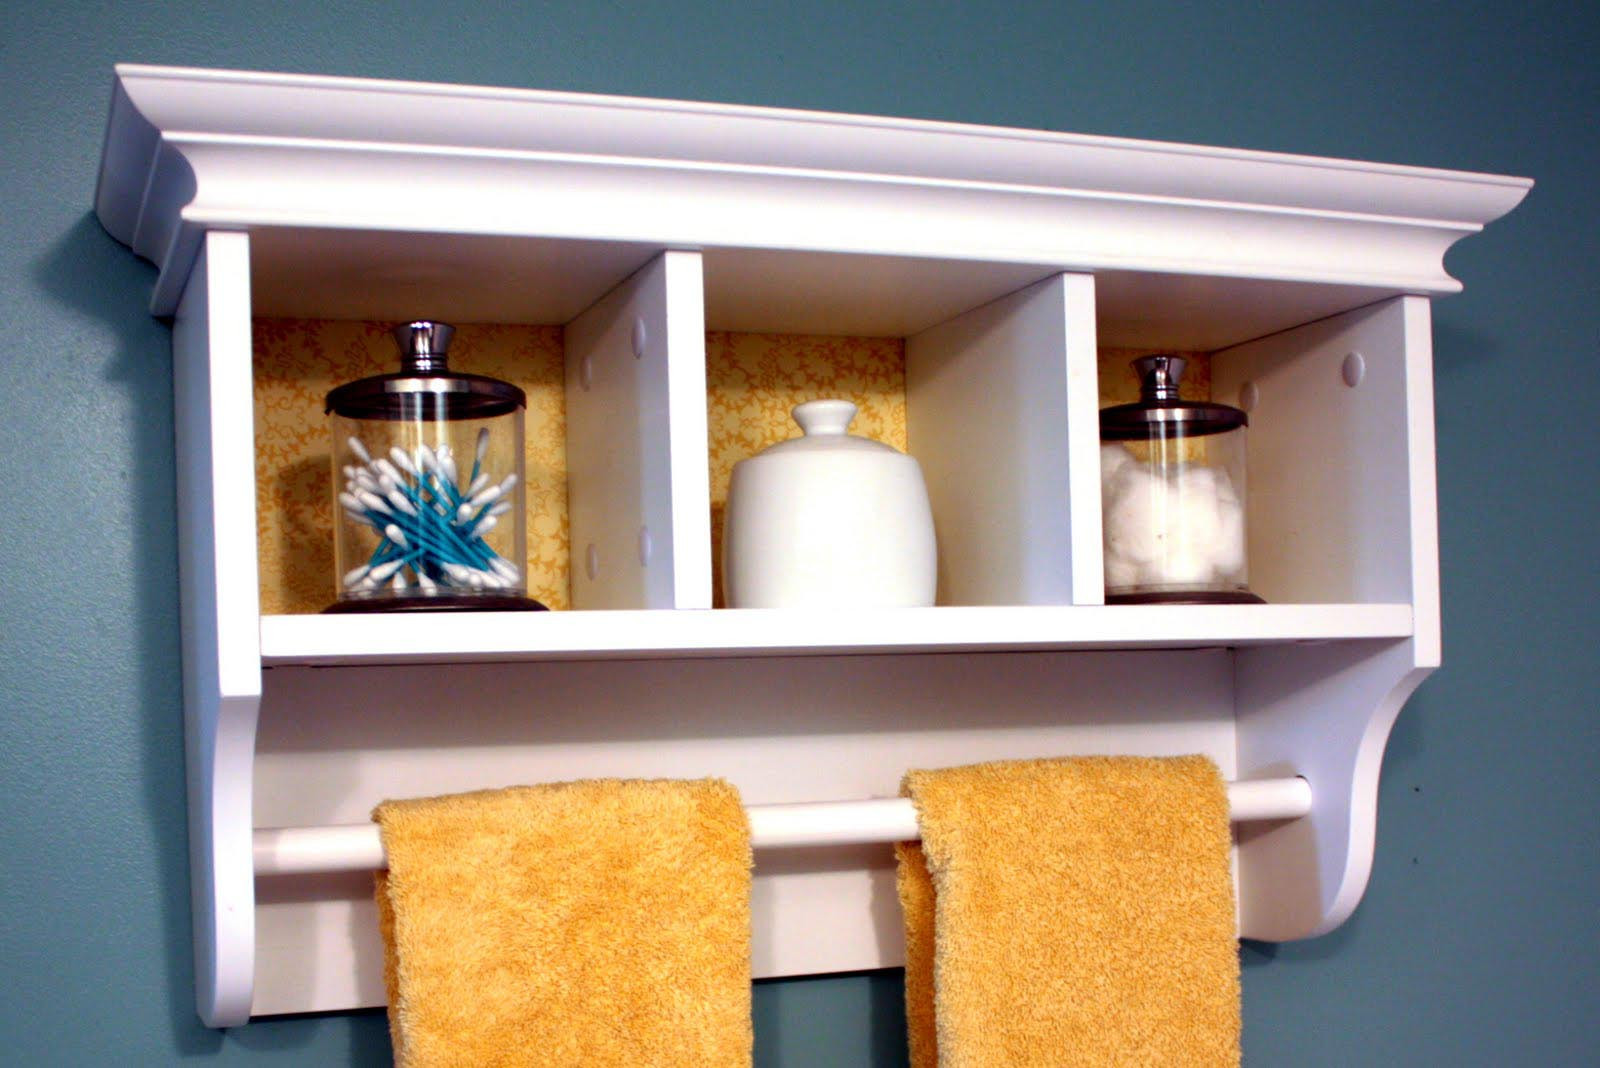 Small Bathroom Wall Shelf New Make Your Life fortable with the Small Wall Shelves